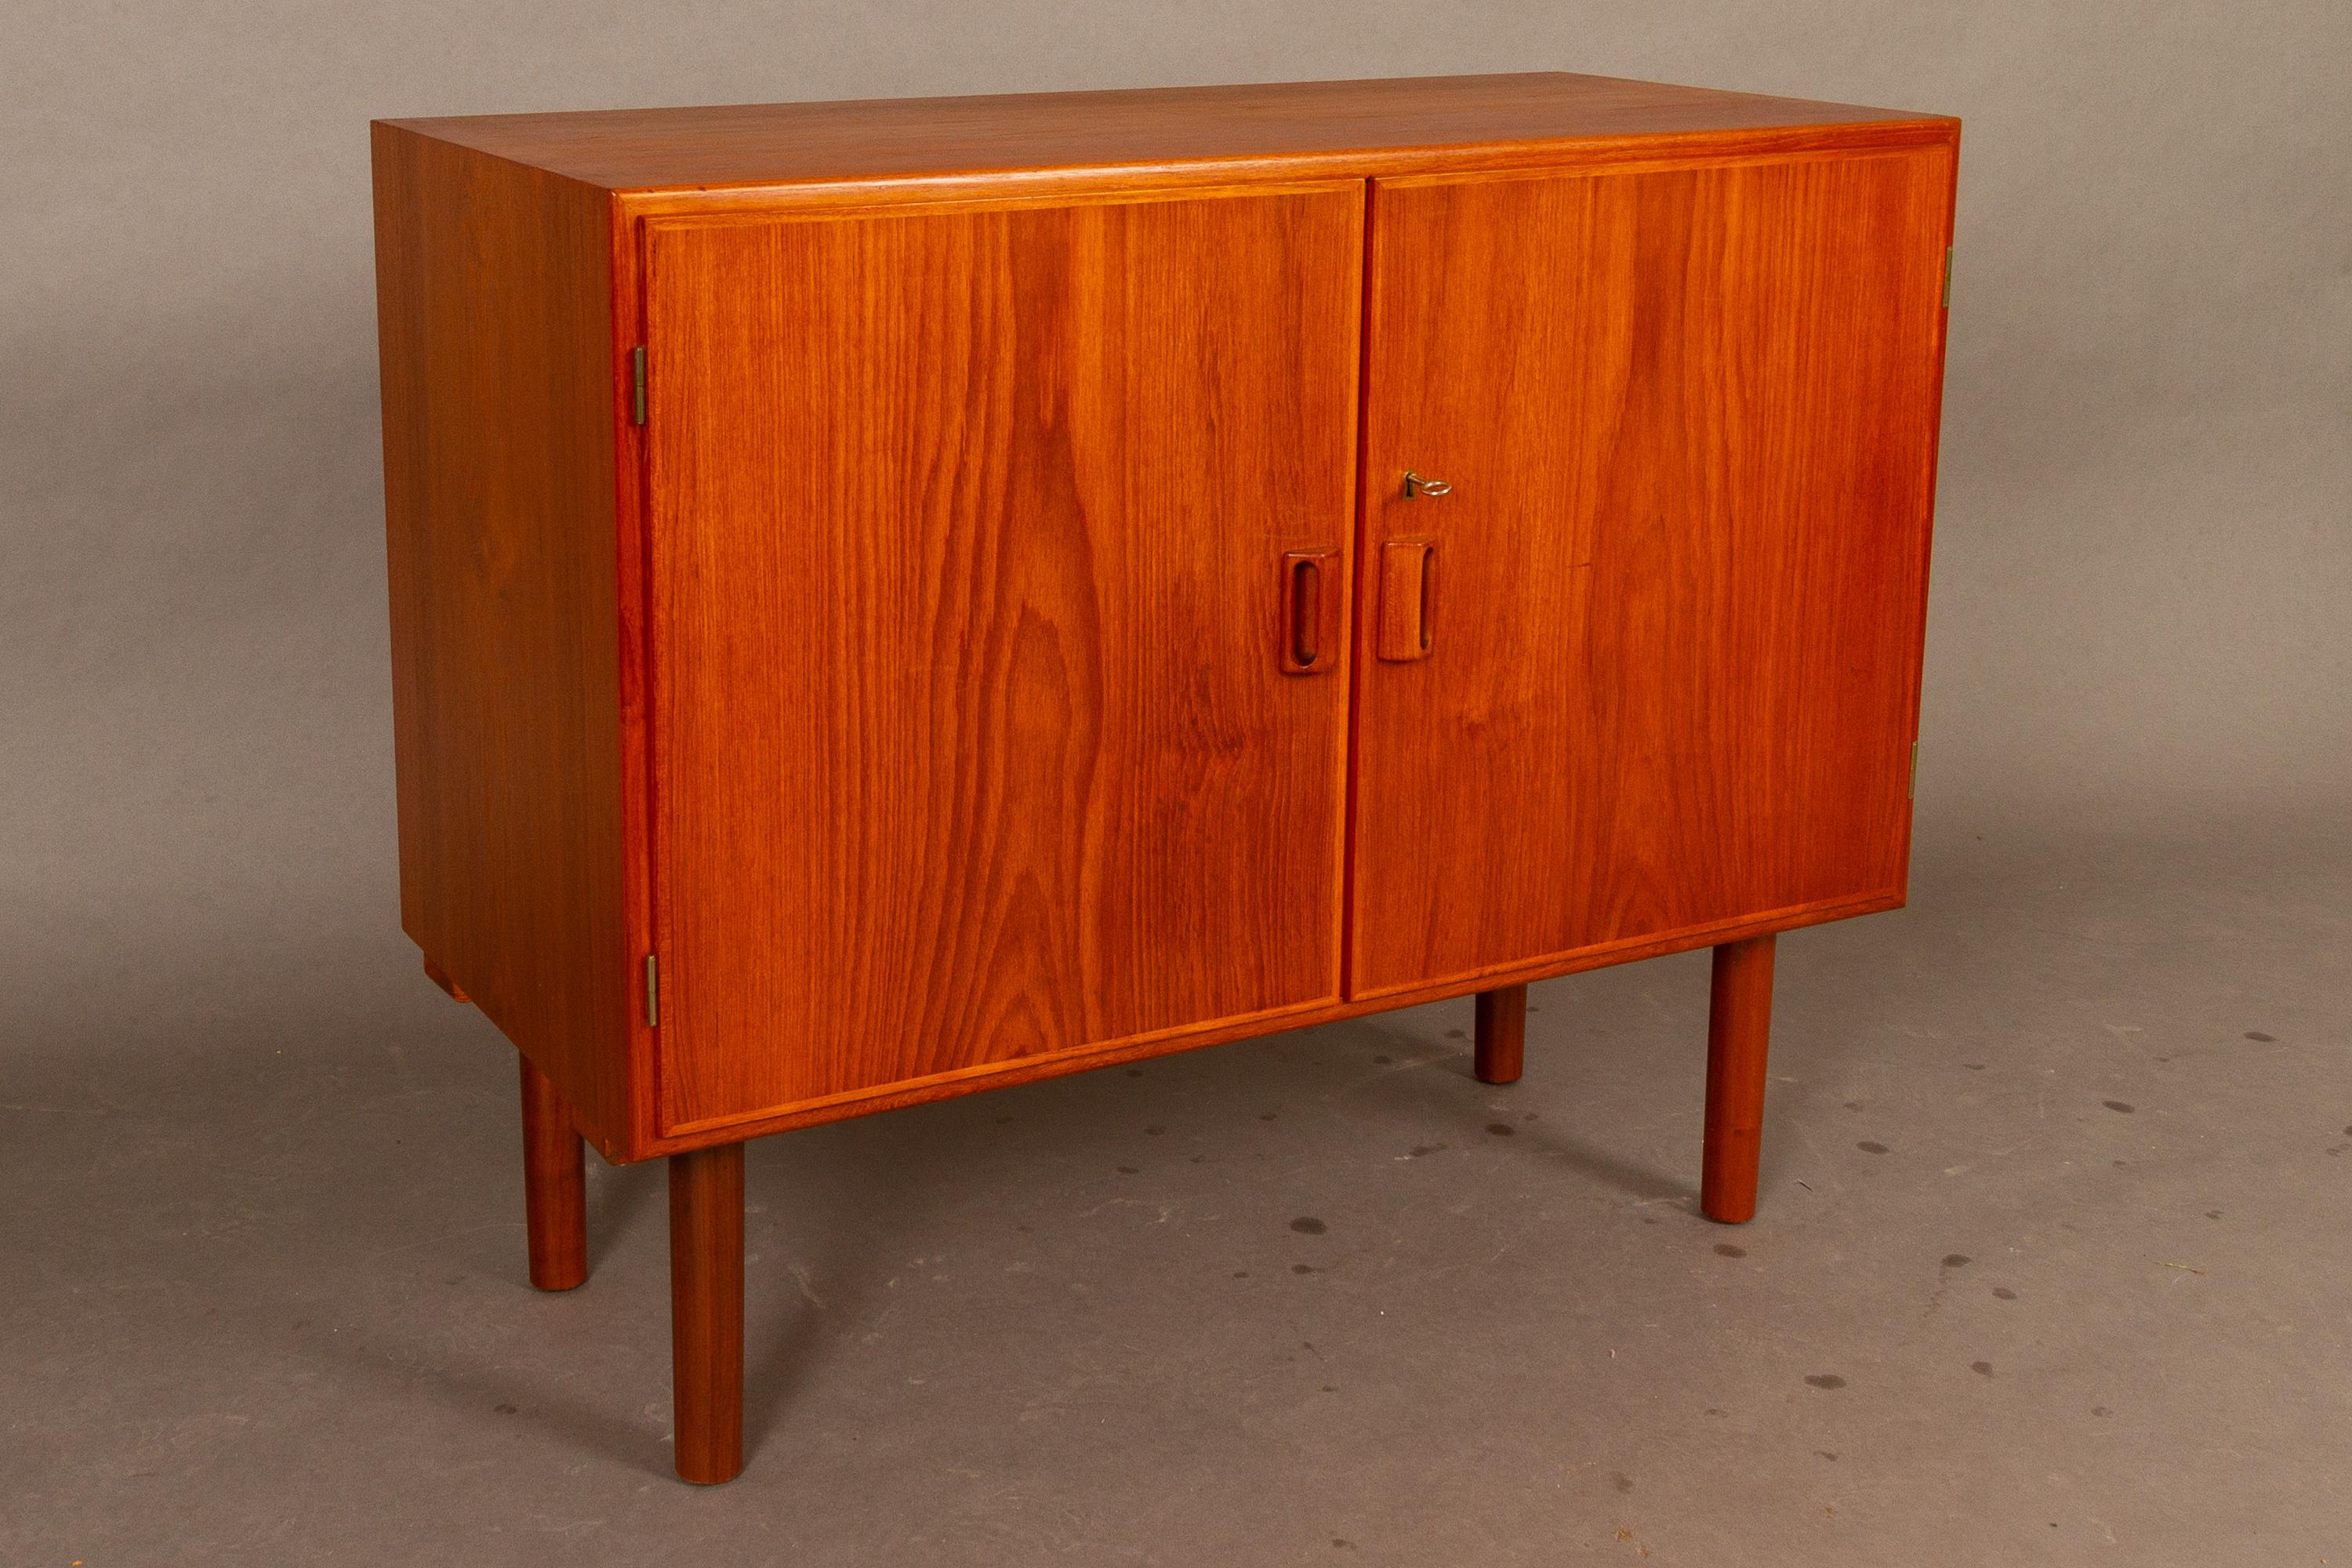 Danish teak cabinet by Børge Mogensen for Søborg Møbler 1960s
Elegant and Classic Mid-Century Modern teak sideboard with two shelves standing on round tapered legs, not original. Inside of cabinet is lined with beech, shelves also in solid beech.